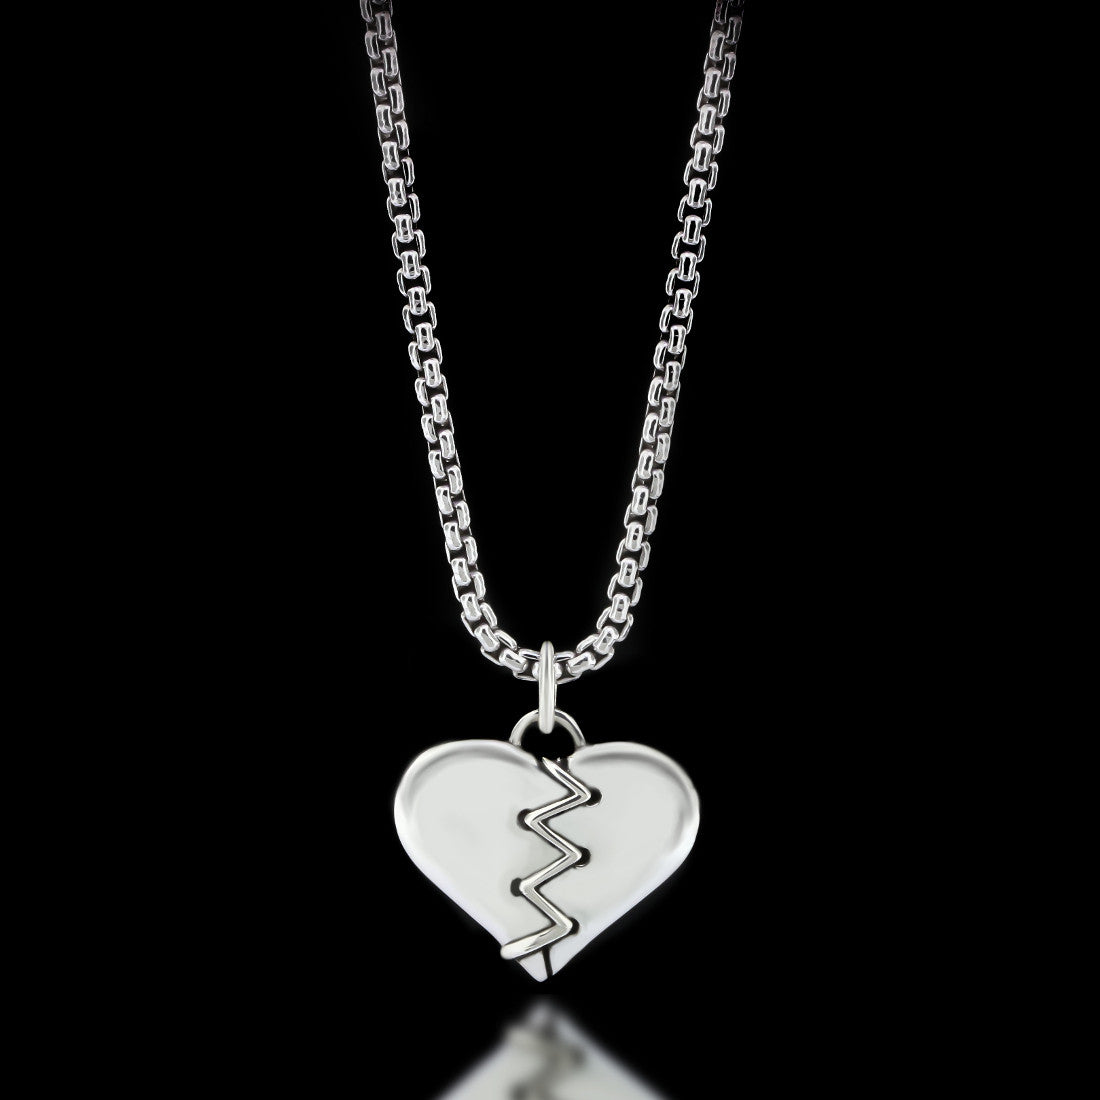 Stitched Heart Necklace - Sterling Silver - Twisted Love NYC